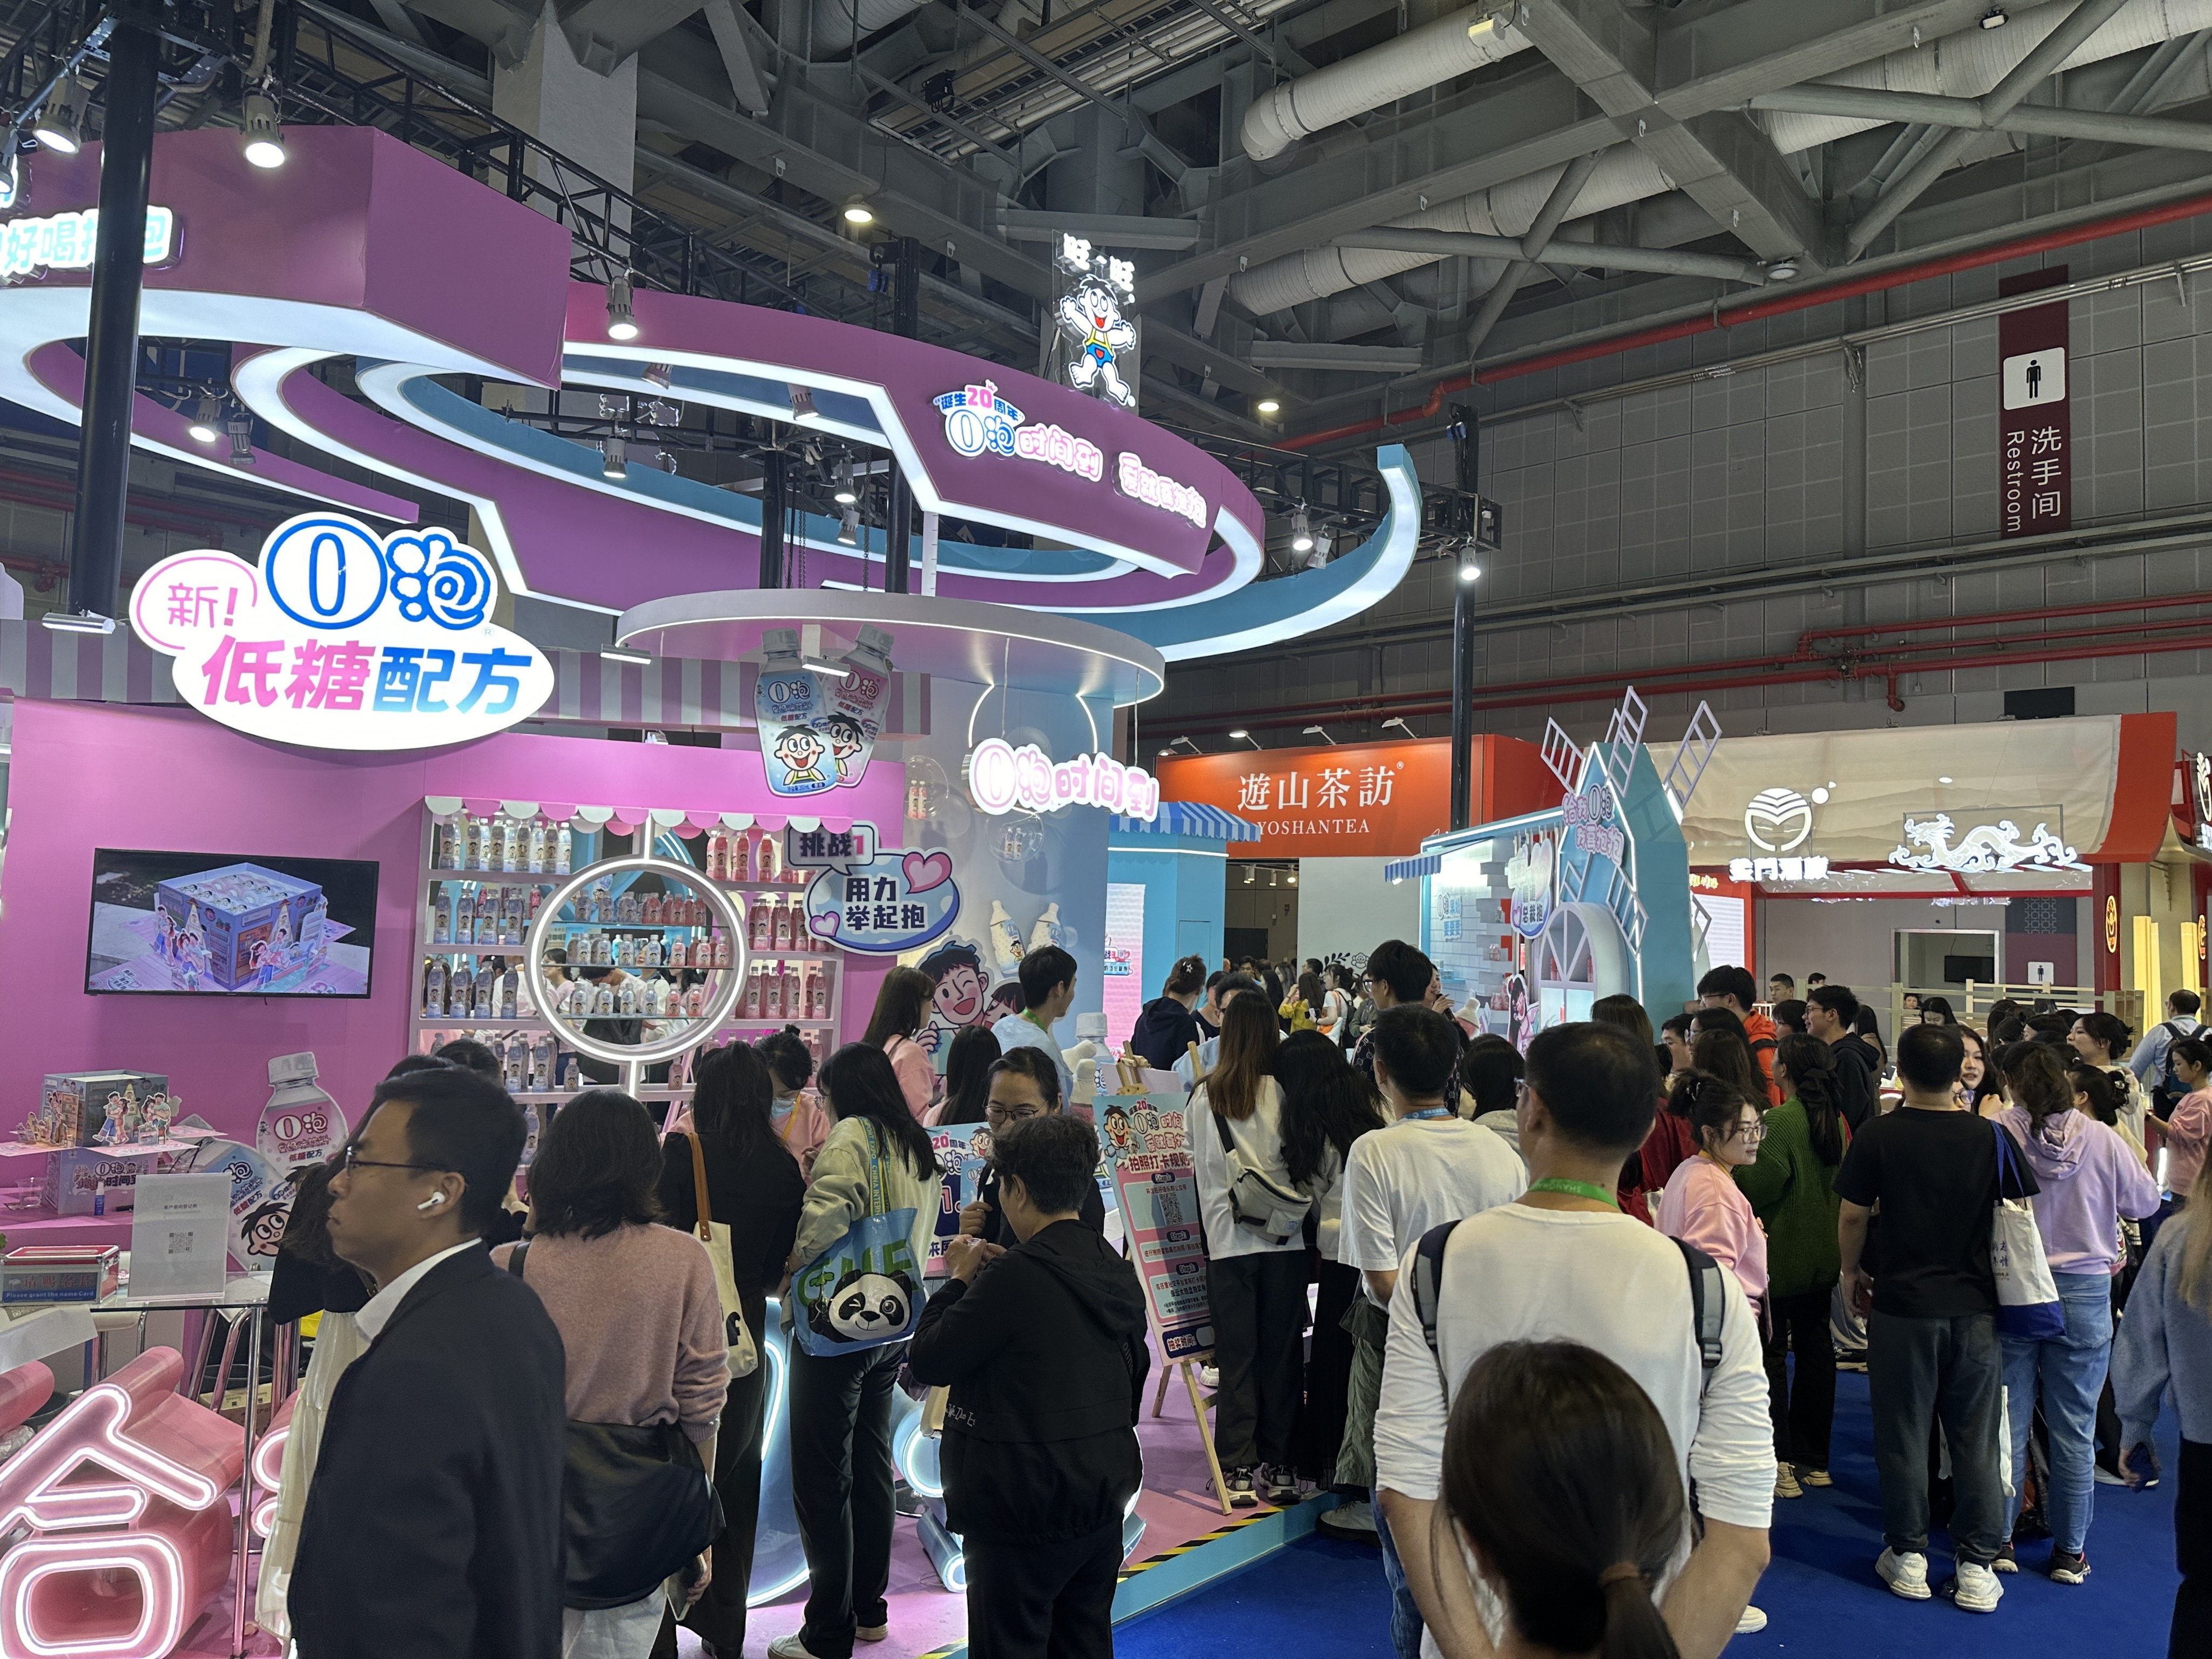 Taiwanese exhibitors at last week’s China International Import Expo complained about where the organiser put their booths. Photo: Frank Chen